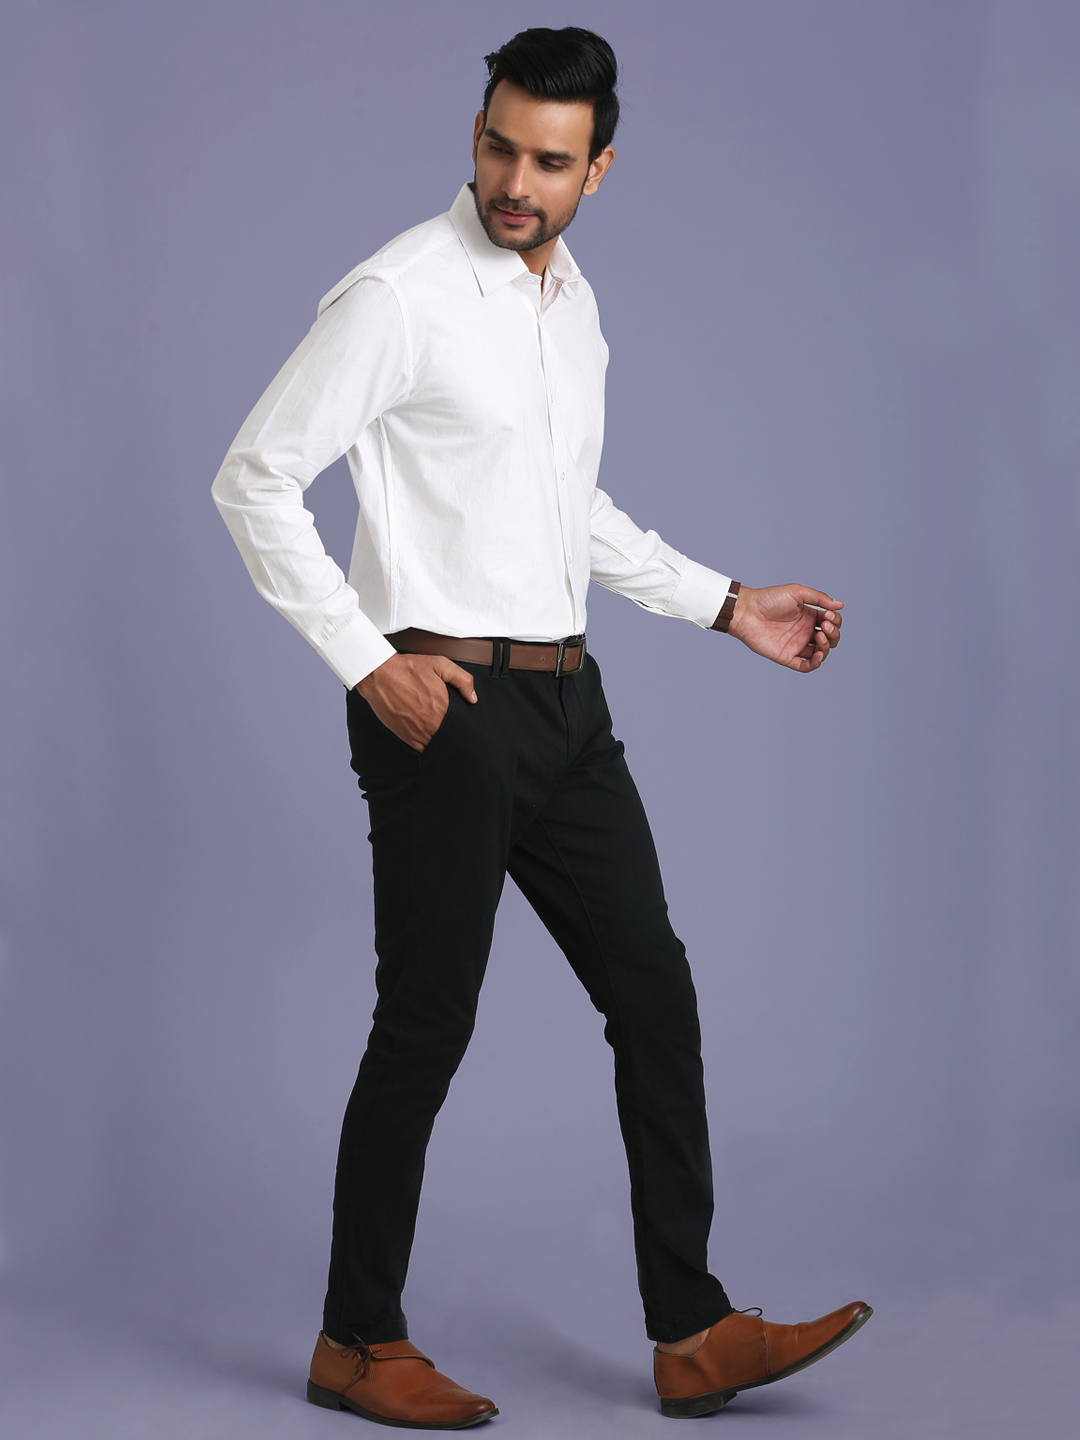 Blue Shirt And White Pant Corporate Uniform For Office